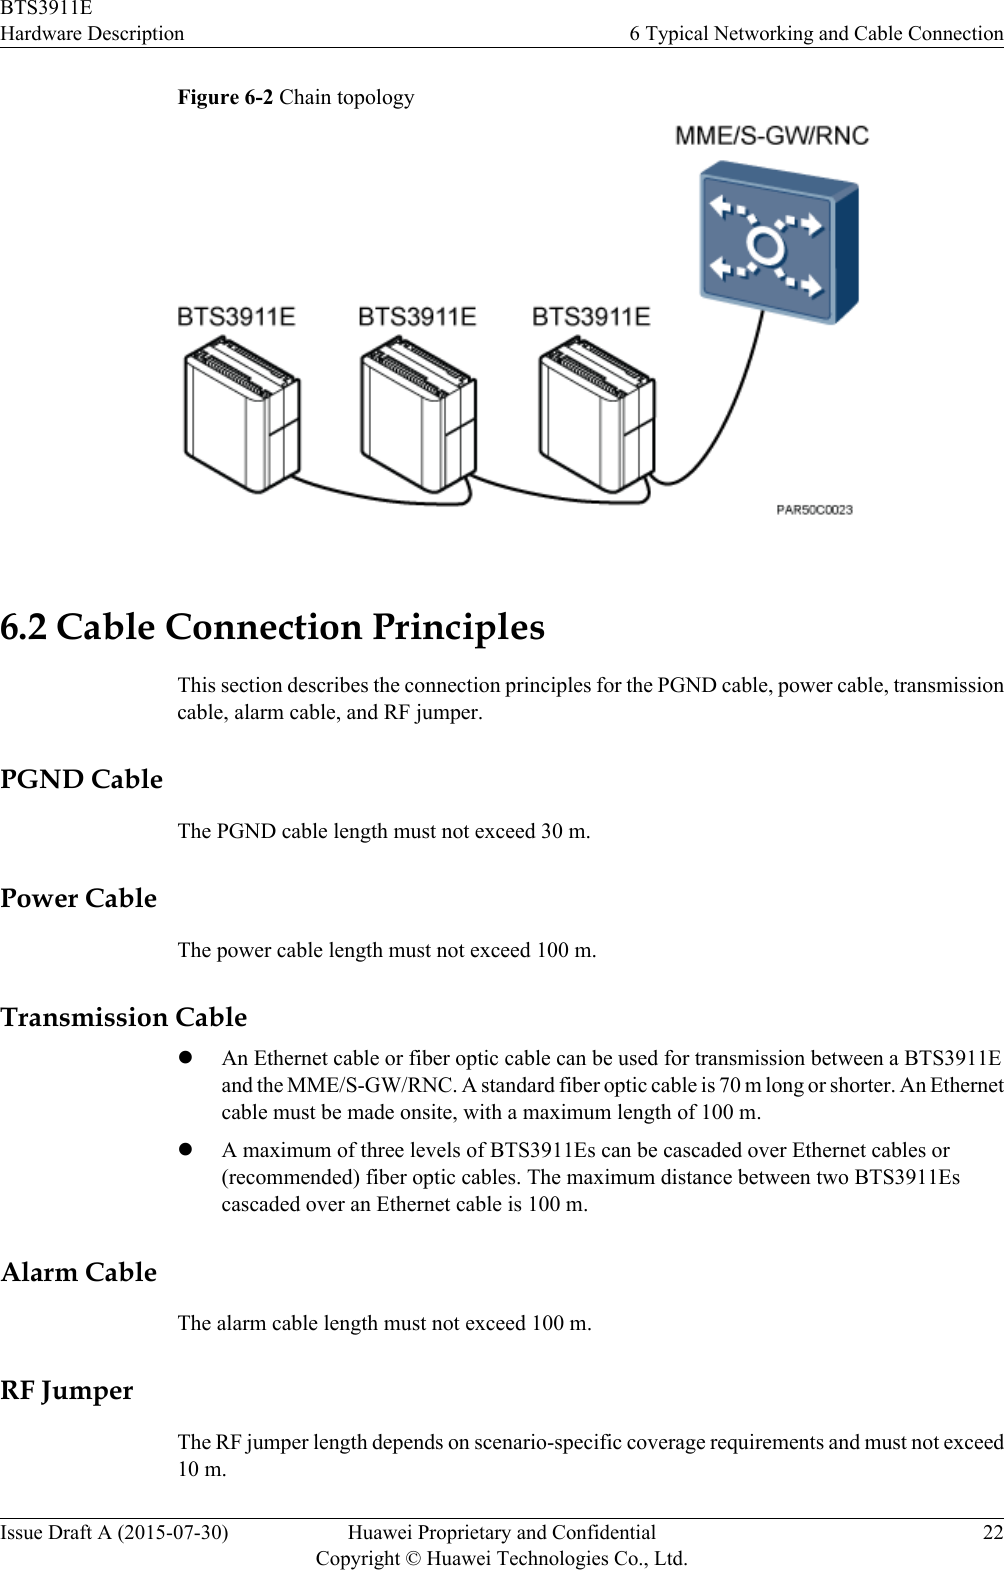 Figure 6-2 Chain topology6.2 Cable Connection PrinciplesThis section describes the connection principles for the PGND cable, power cable, transmissioncable, alarm cable, and RF jumper.PGND CableThe PGND cable length must not exceed 30 m.Power CableThe power cable length must not exceed 100 m.Transmission CablelAn Ethernet cable or fiber optic cable can be used for transmission between a BTS3911Eand the MME/S-GW/RNC. A standard fiber optic cable is 70 m long or shorter. An Ethernetcable must be made onsite, with a maximum length of 100 m.lA maximum of three levels of BTS3911Es can be cascaded over Ethernet cables or(recommended) fiber optic cables. The maximum distance between two BTS3911Escascaded over an Ethernet cable is 100 m.Alarm CableThe alarm cable length must not exceed 100 m.RF JumperThe RF jumper length depends on scenario-specific coverage requirements and must not exceed10 m.BTS3911EHardware Description 6 Typical Networking and Cable ConnectionIssue Draft A (2015-07-30) Huawei Proprietary and ConfidentialCopyright © Huawei Technologies Co., Ltd.22